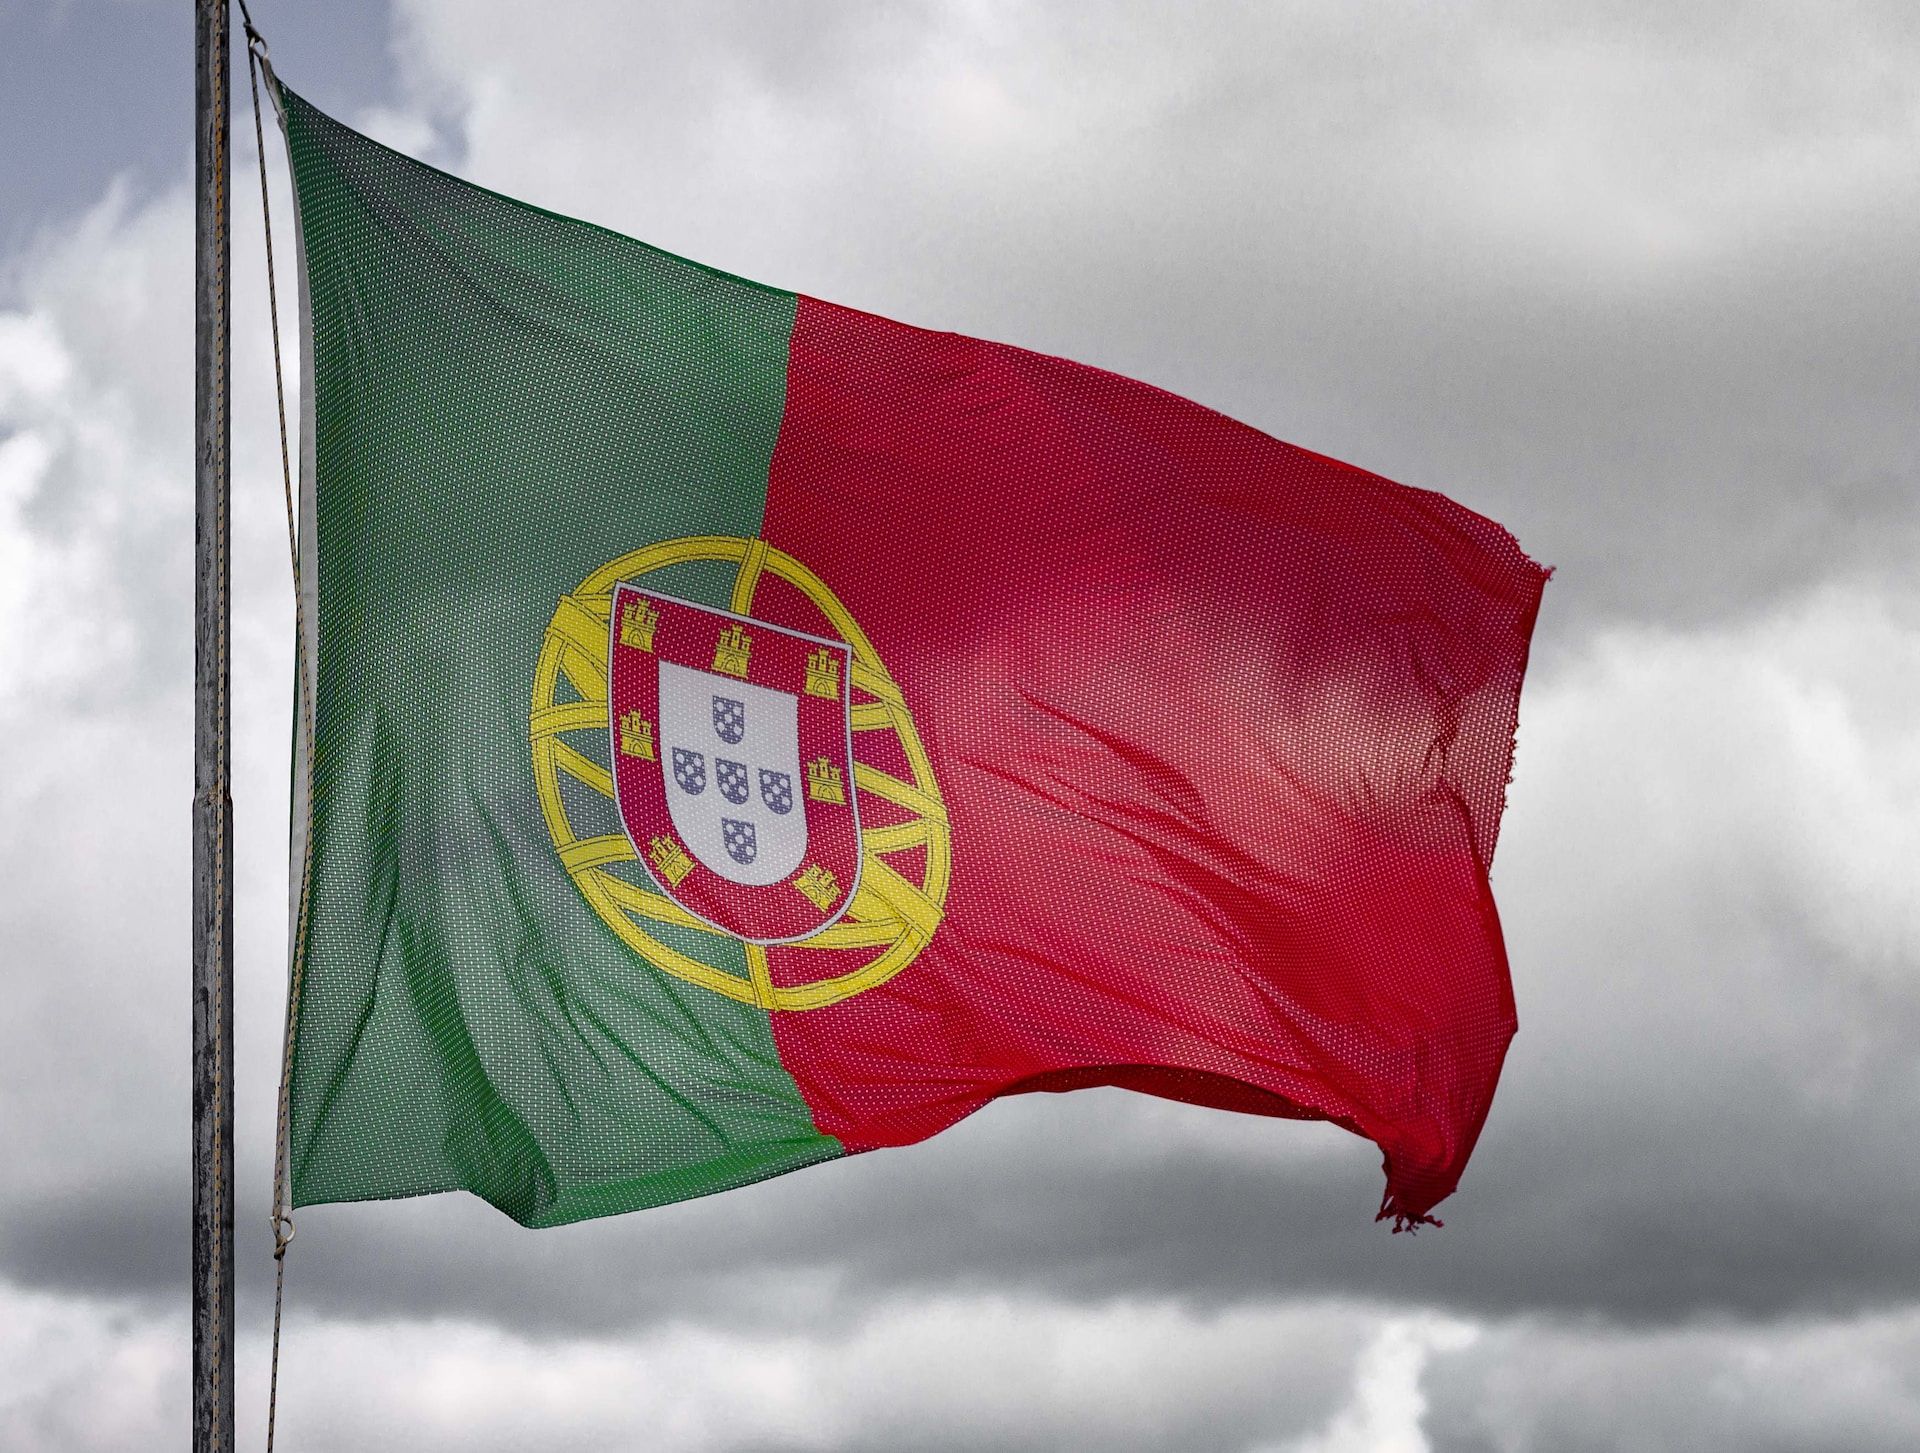 The Portuguese flag flying